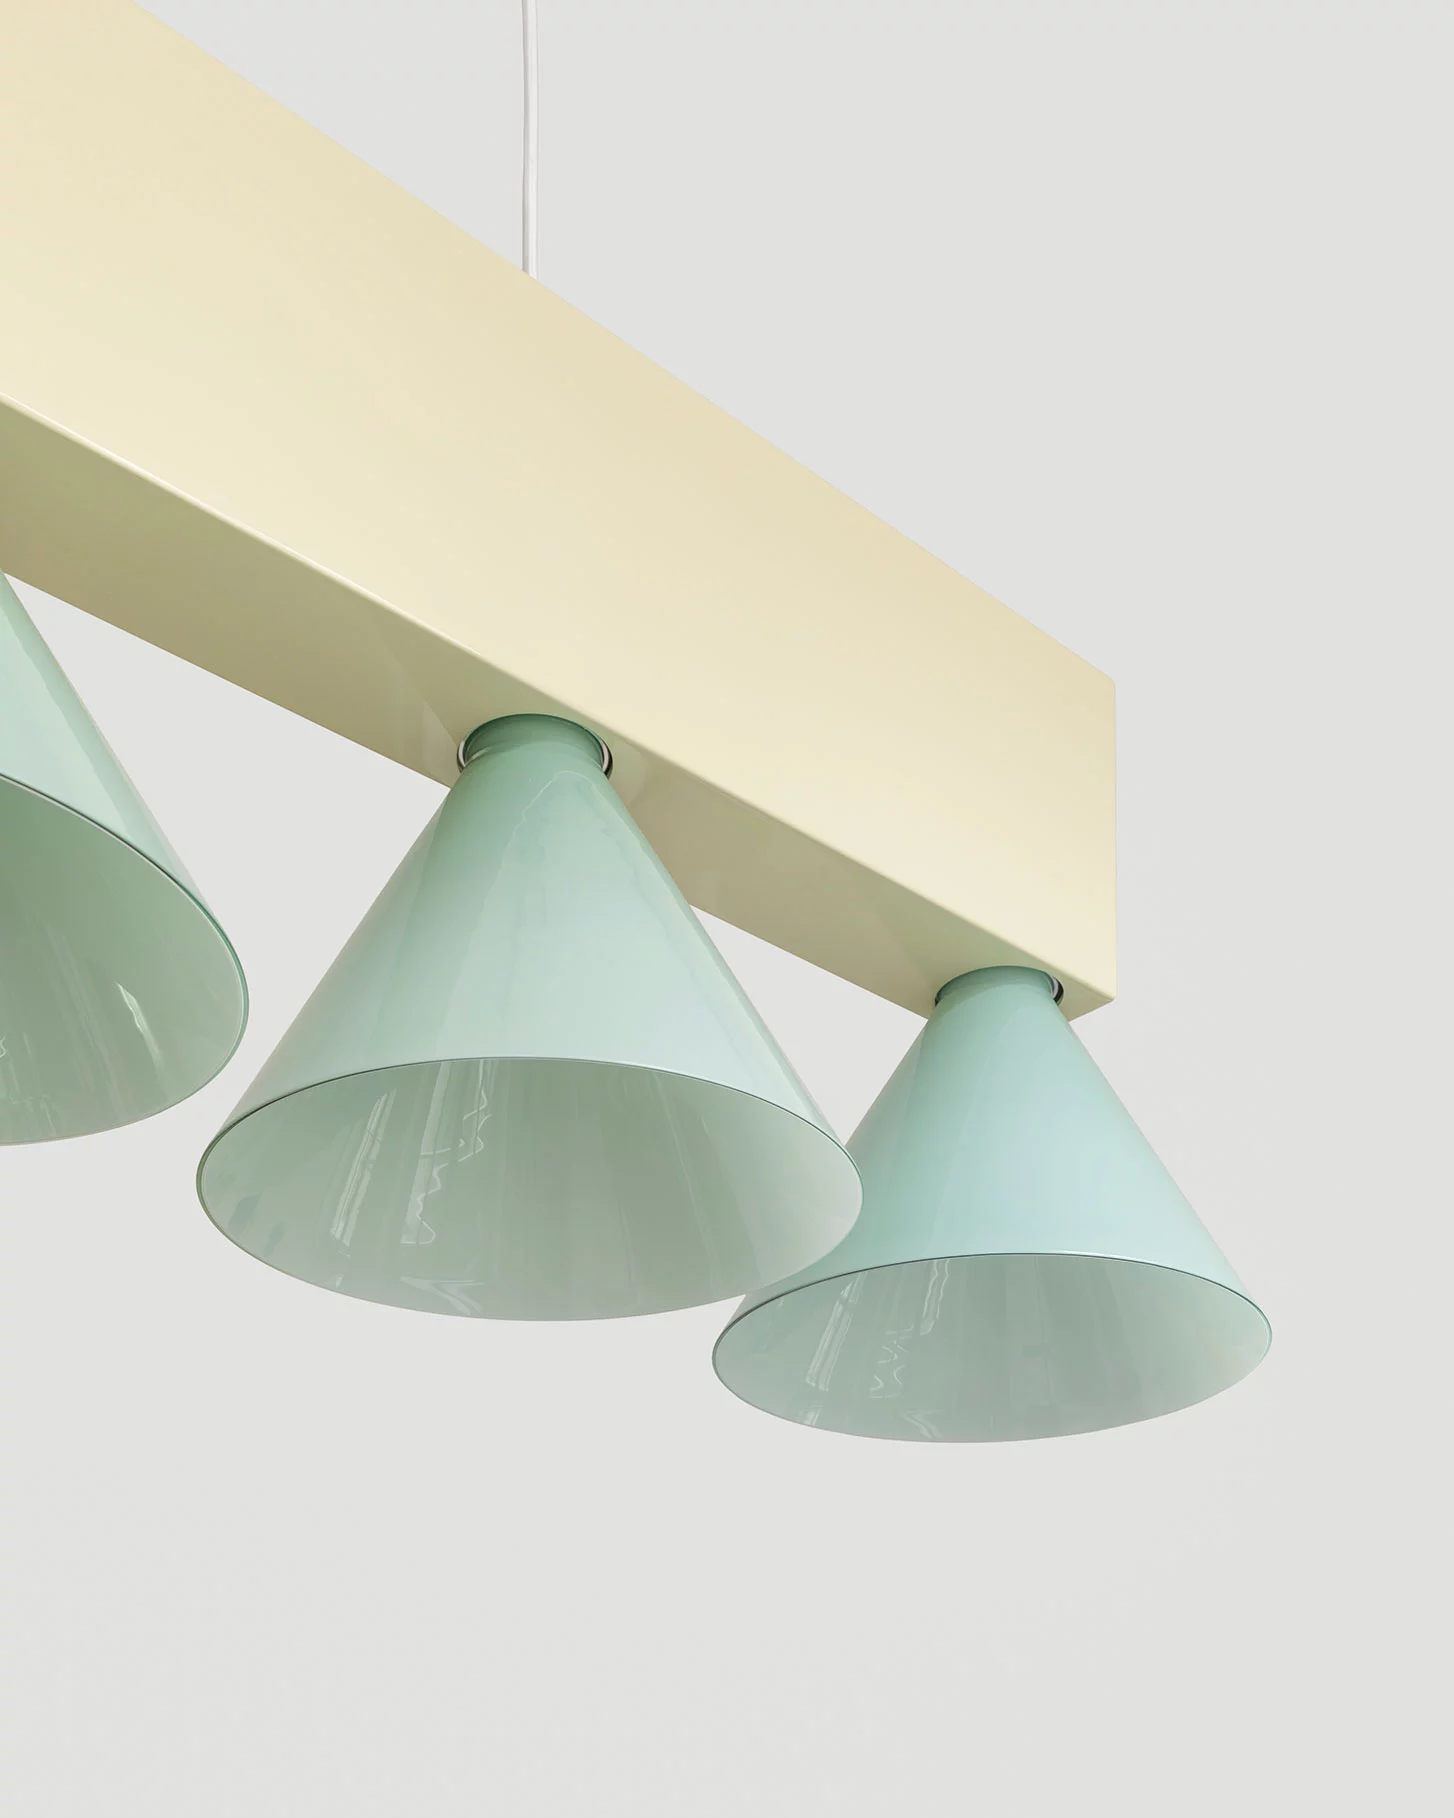 For Designers Edward Barber and Jay Osgerby, the Cone Is “Perfect Geometry”